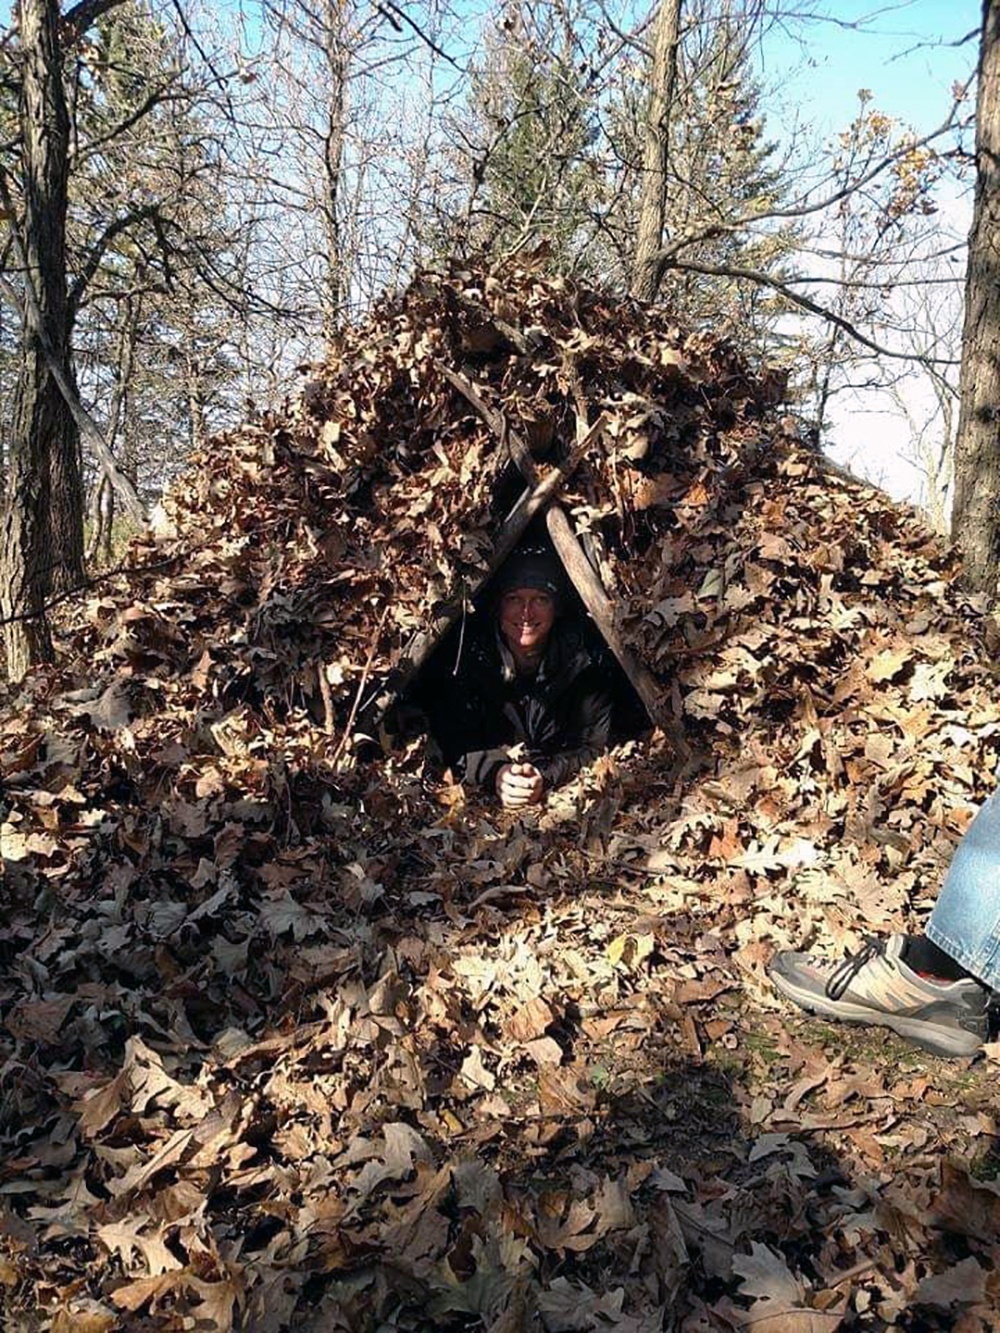 Submitted Photo - Debris hut shelter - Minnesota Primitive Skills and Survival School